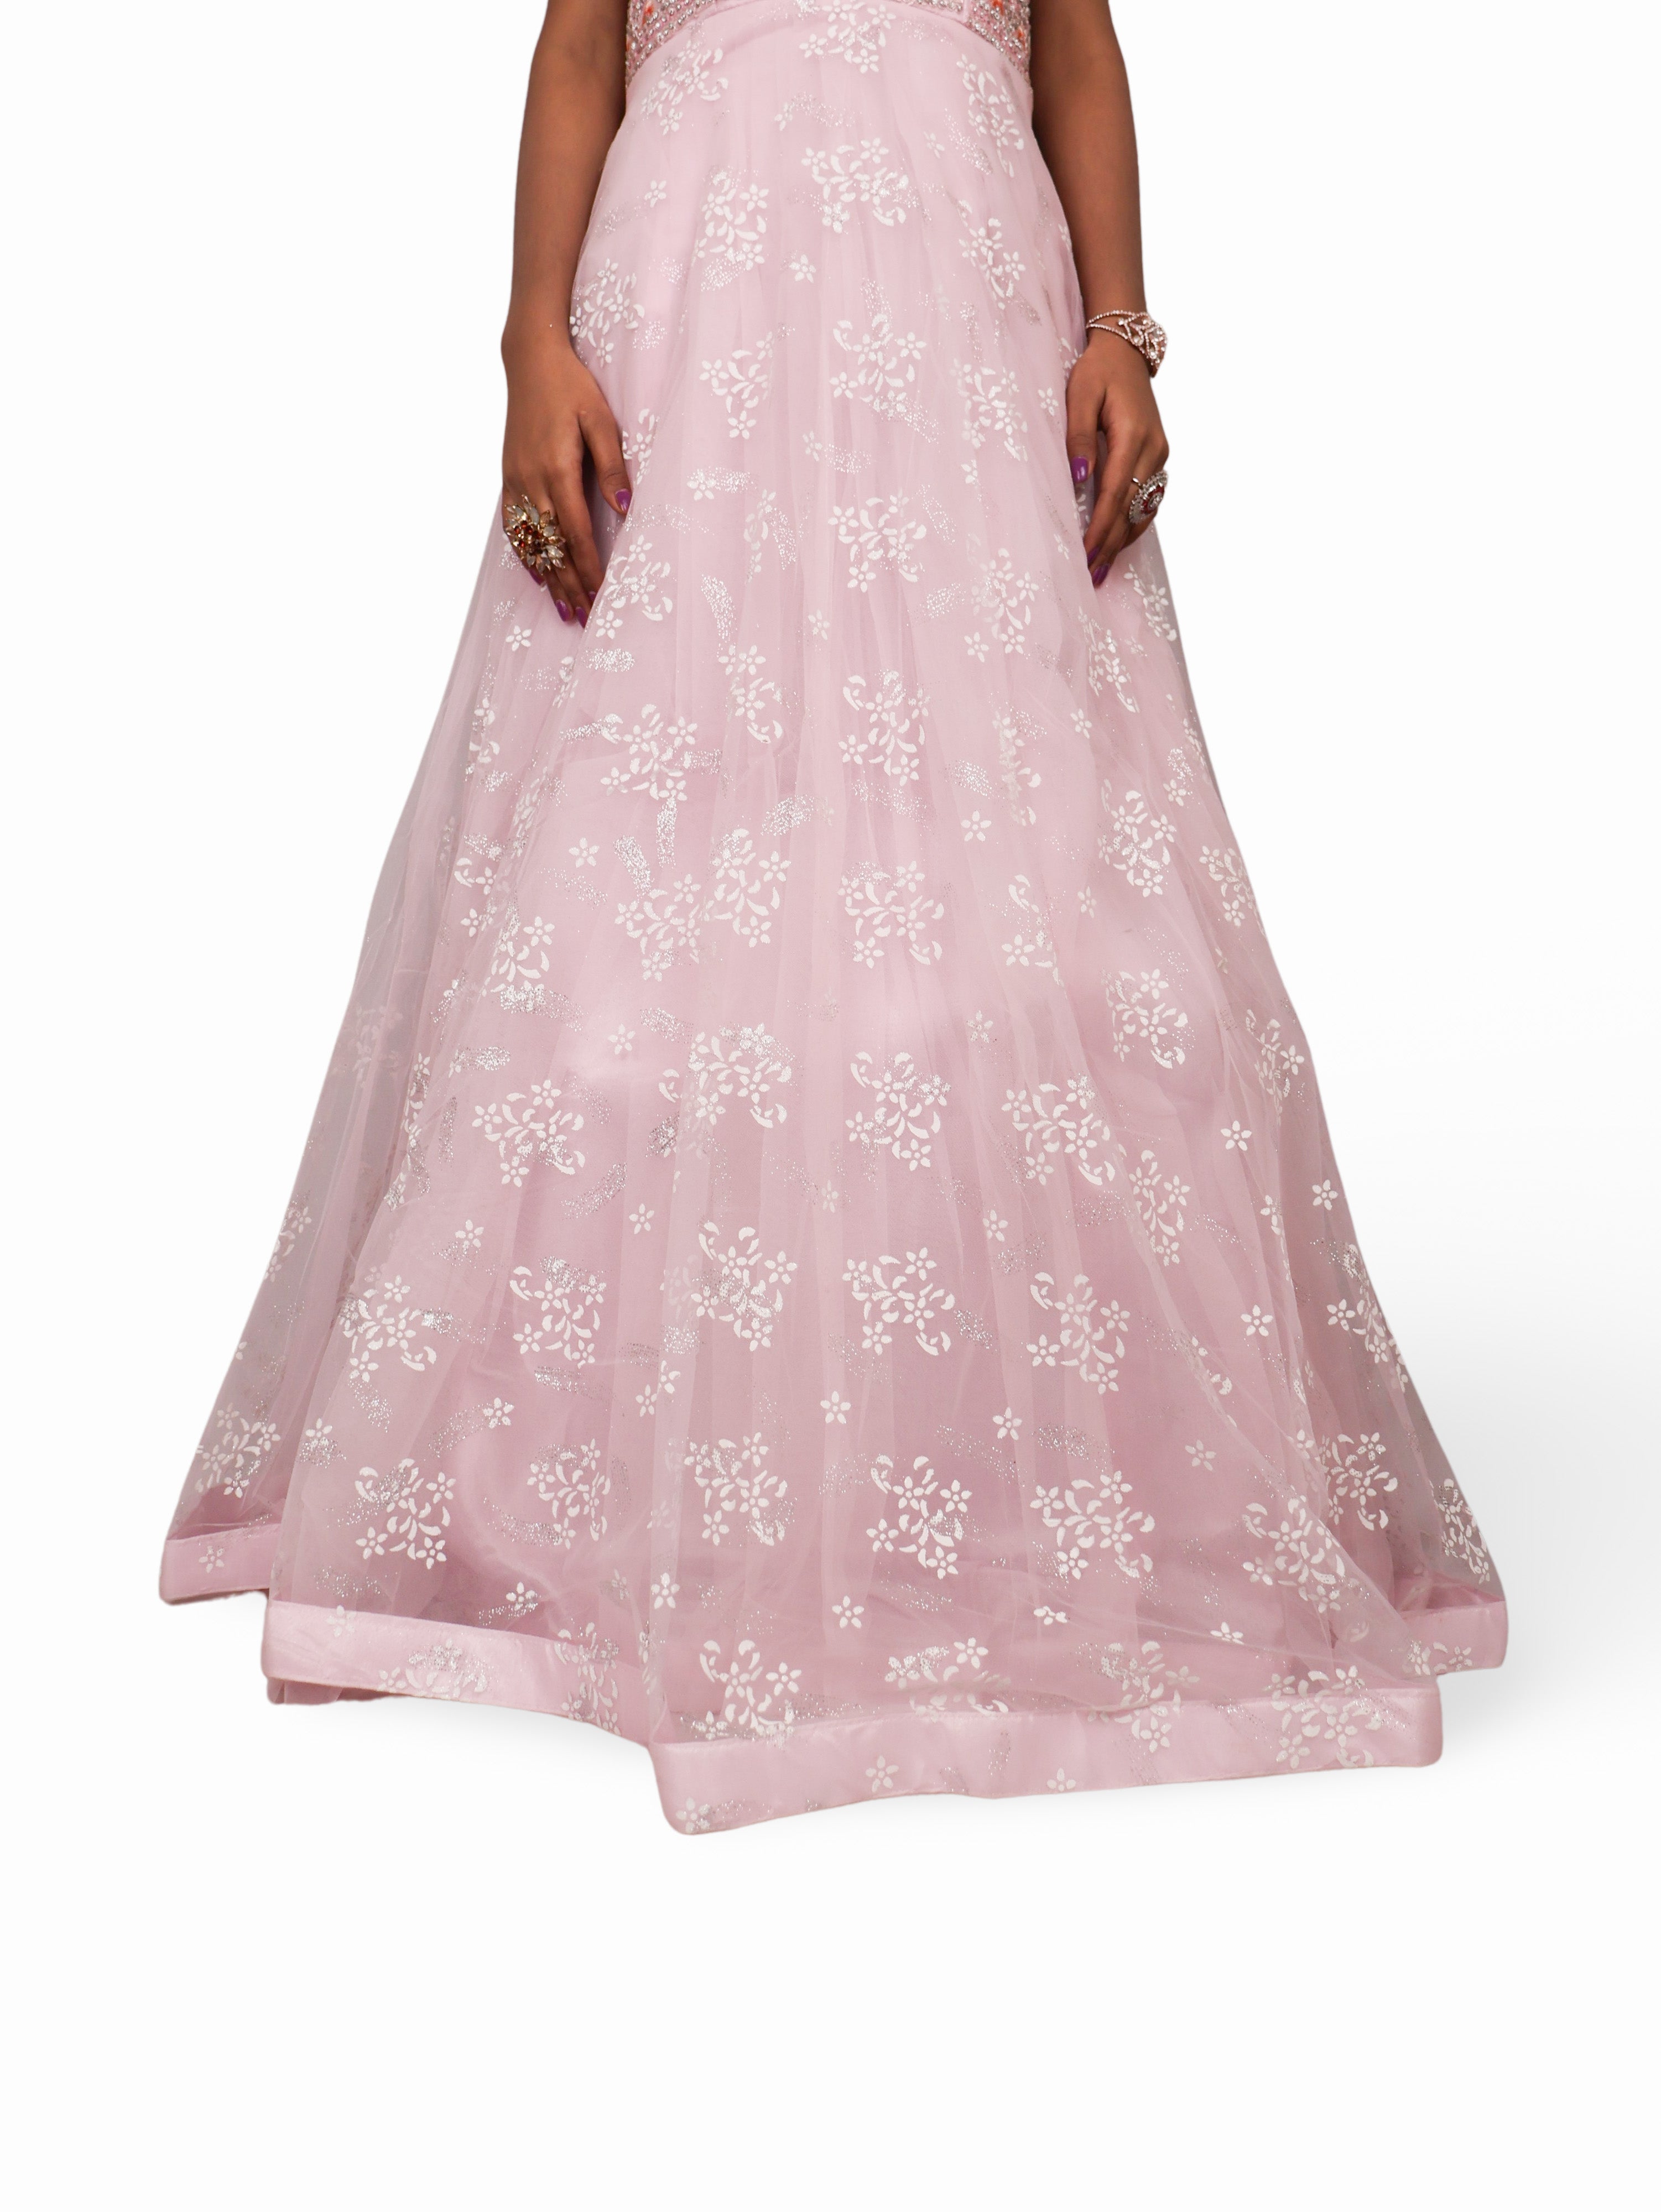 Gown with Stone Work &amp; Embroidery by Shreekama Pink Designer Gowns for Party Festival Wedding Occasion in Noida